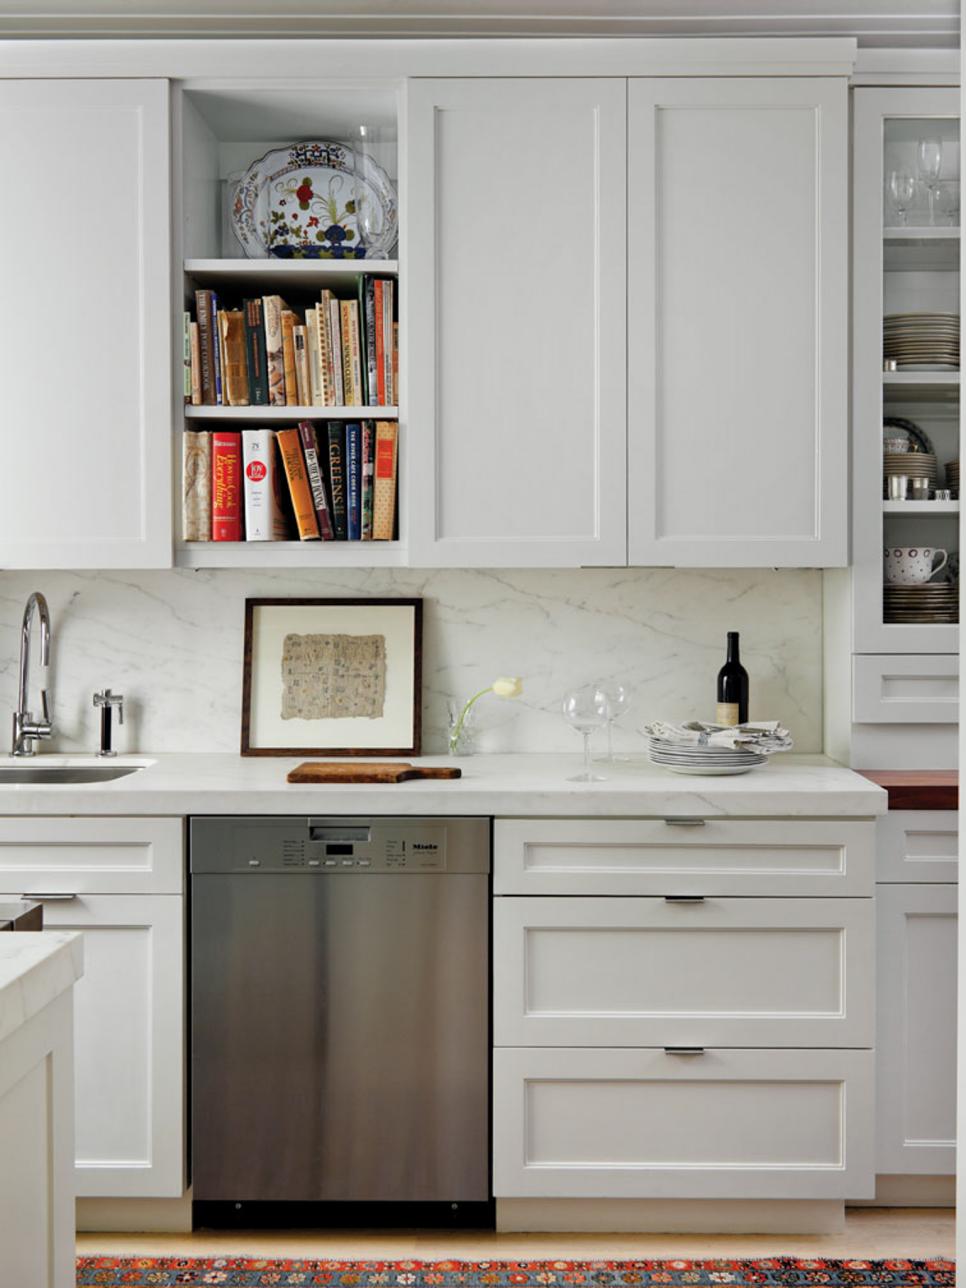 Kitchen With Tall White Cabinets, Built-In Shelves & Marble Backsplash